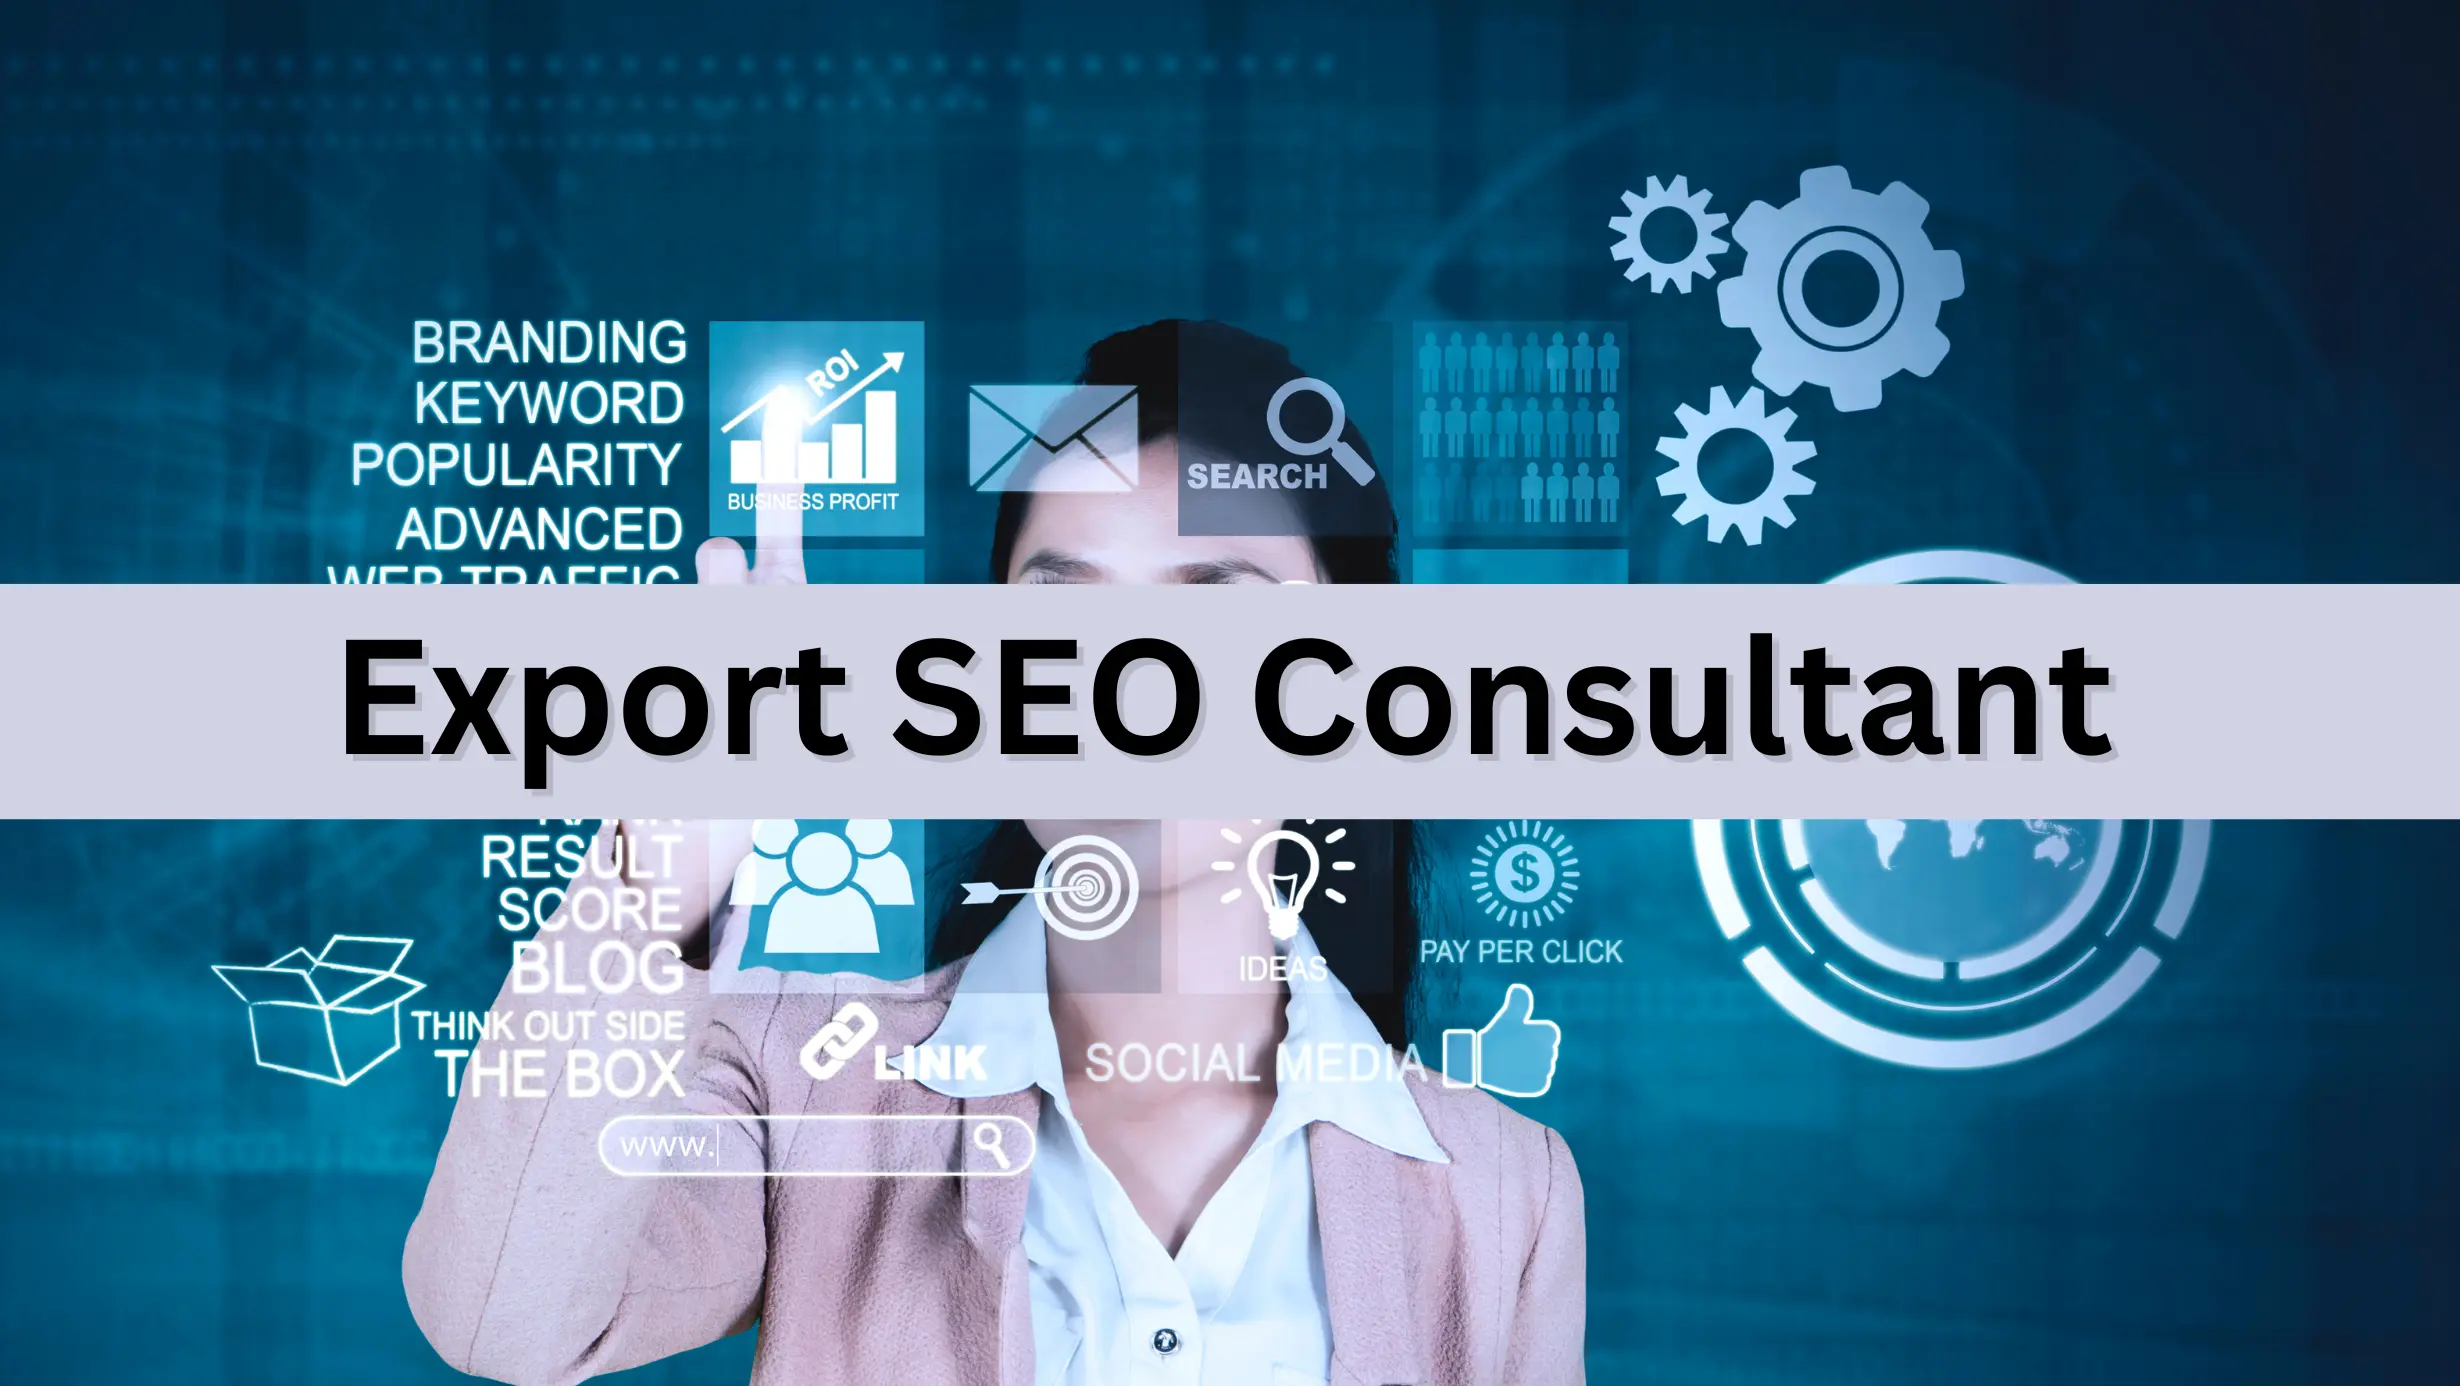 Are you looking for an experienced export SEO consultant?